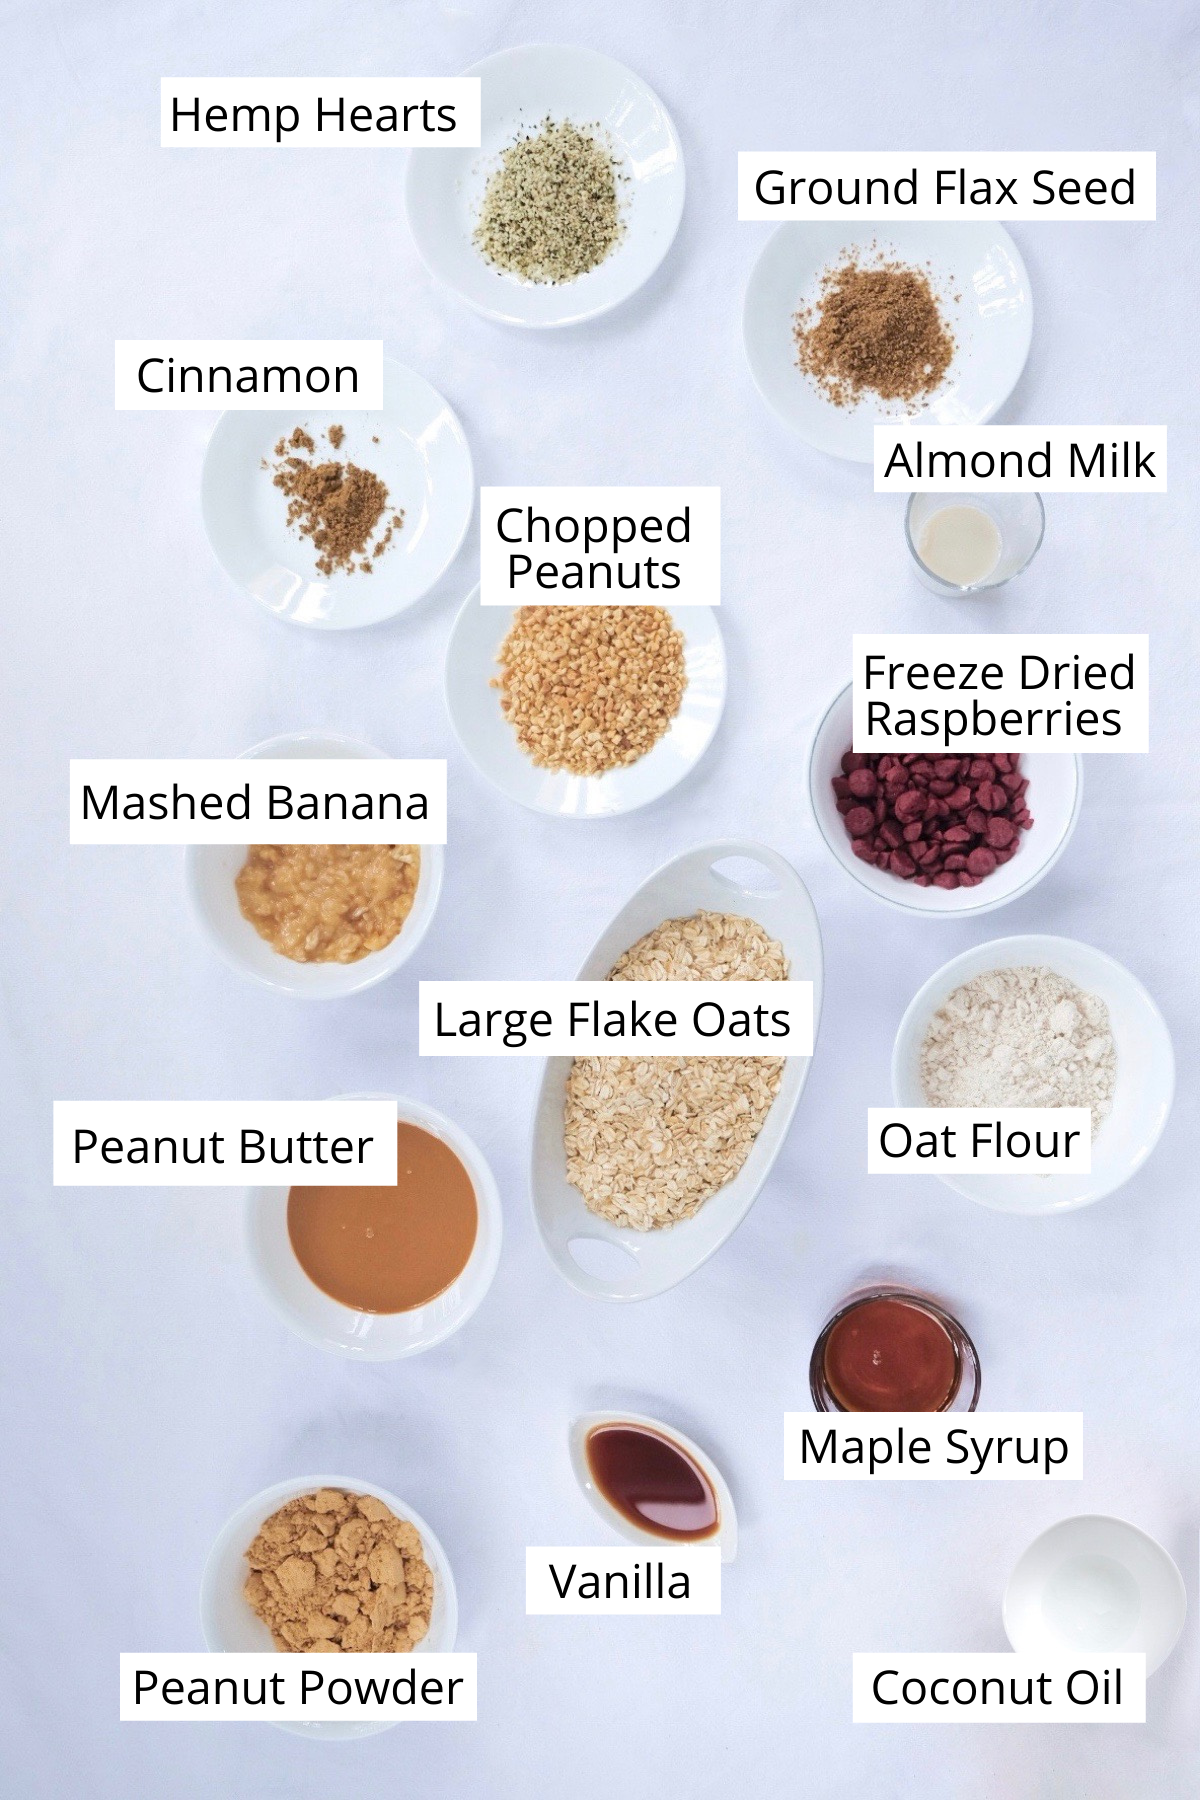 A birds-eye view of the ingredients used to make the peanut butter and jelly cookies, including peanut powder, vanilla, coconut oil, vanilla, maple syrup, oat flour, large flake oats, peanut butter, mashed banana, freeze dried raspberries, chopped peanuts, almond milk, ground flax seed, cinnamon and hemp hearts.